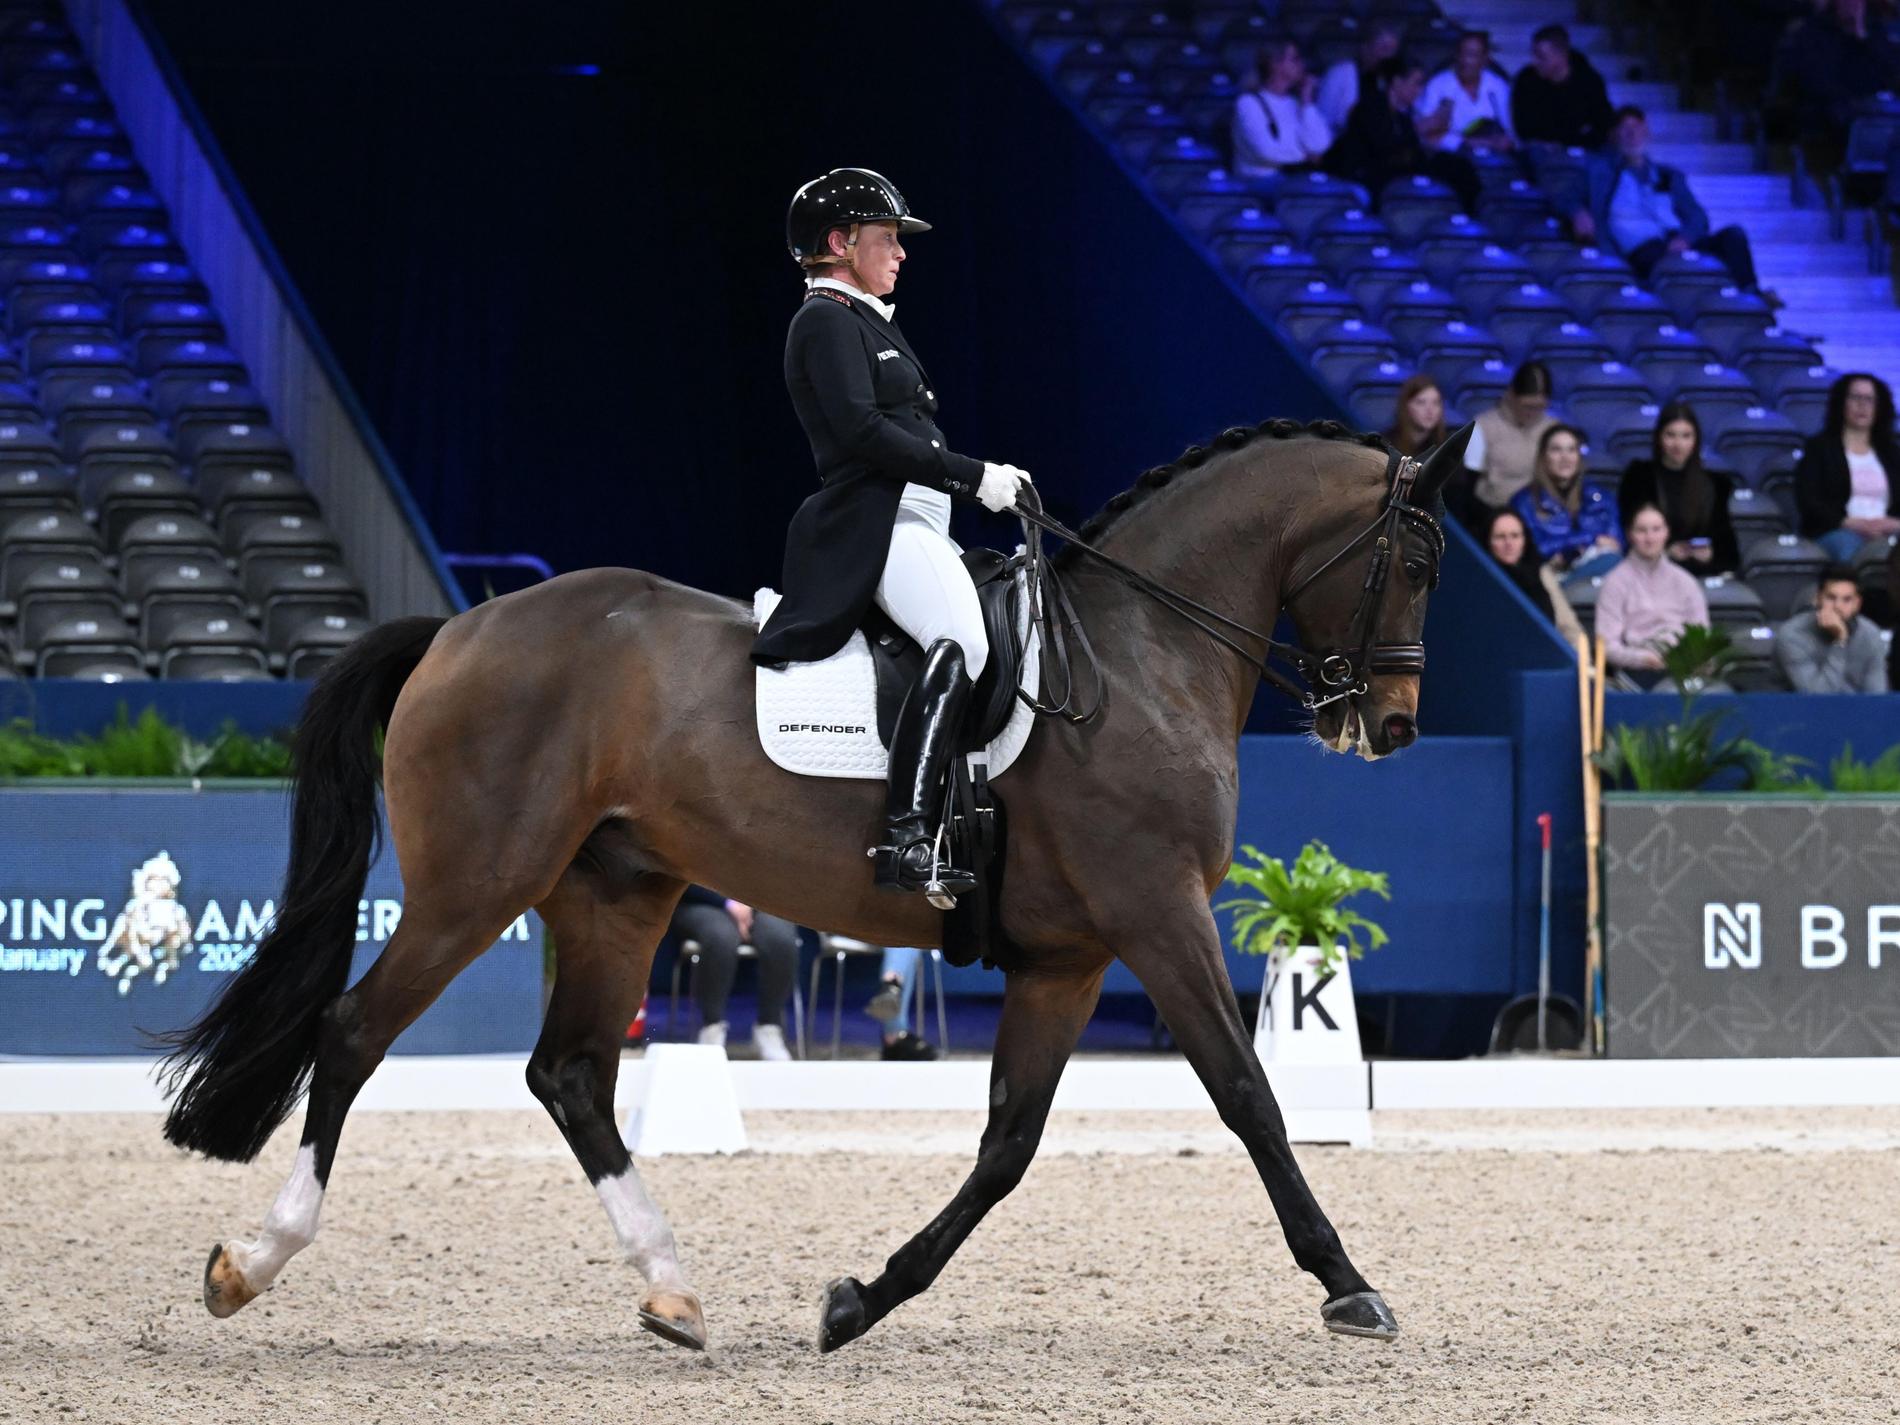 Isabell Werth with the horse DSP Quantaz during her program in Amsterdam.